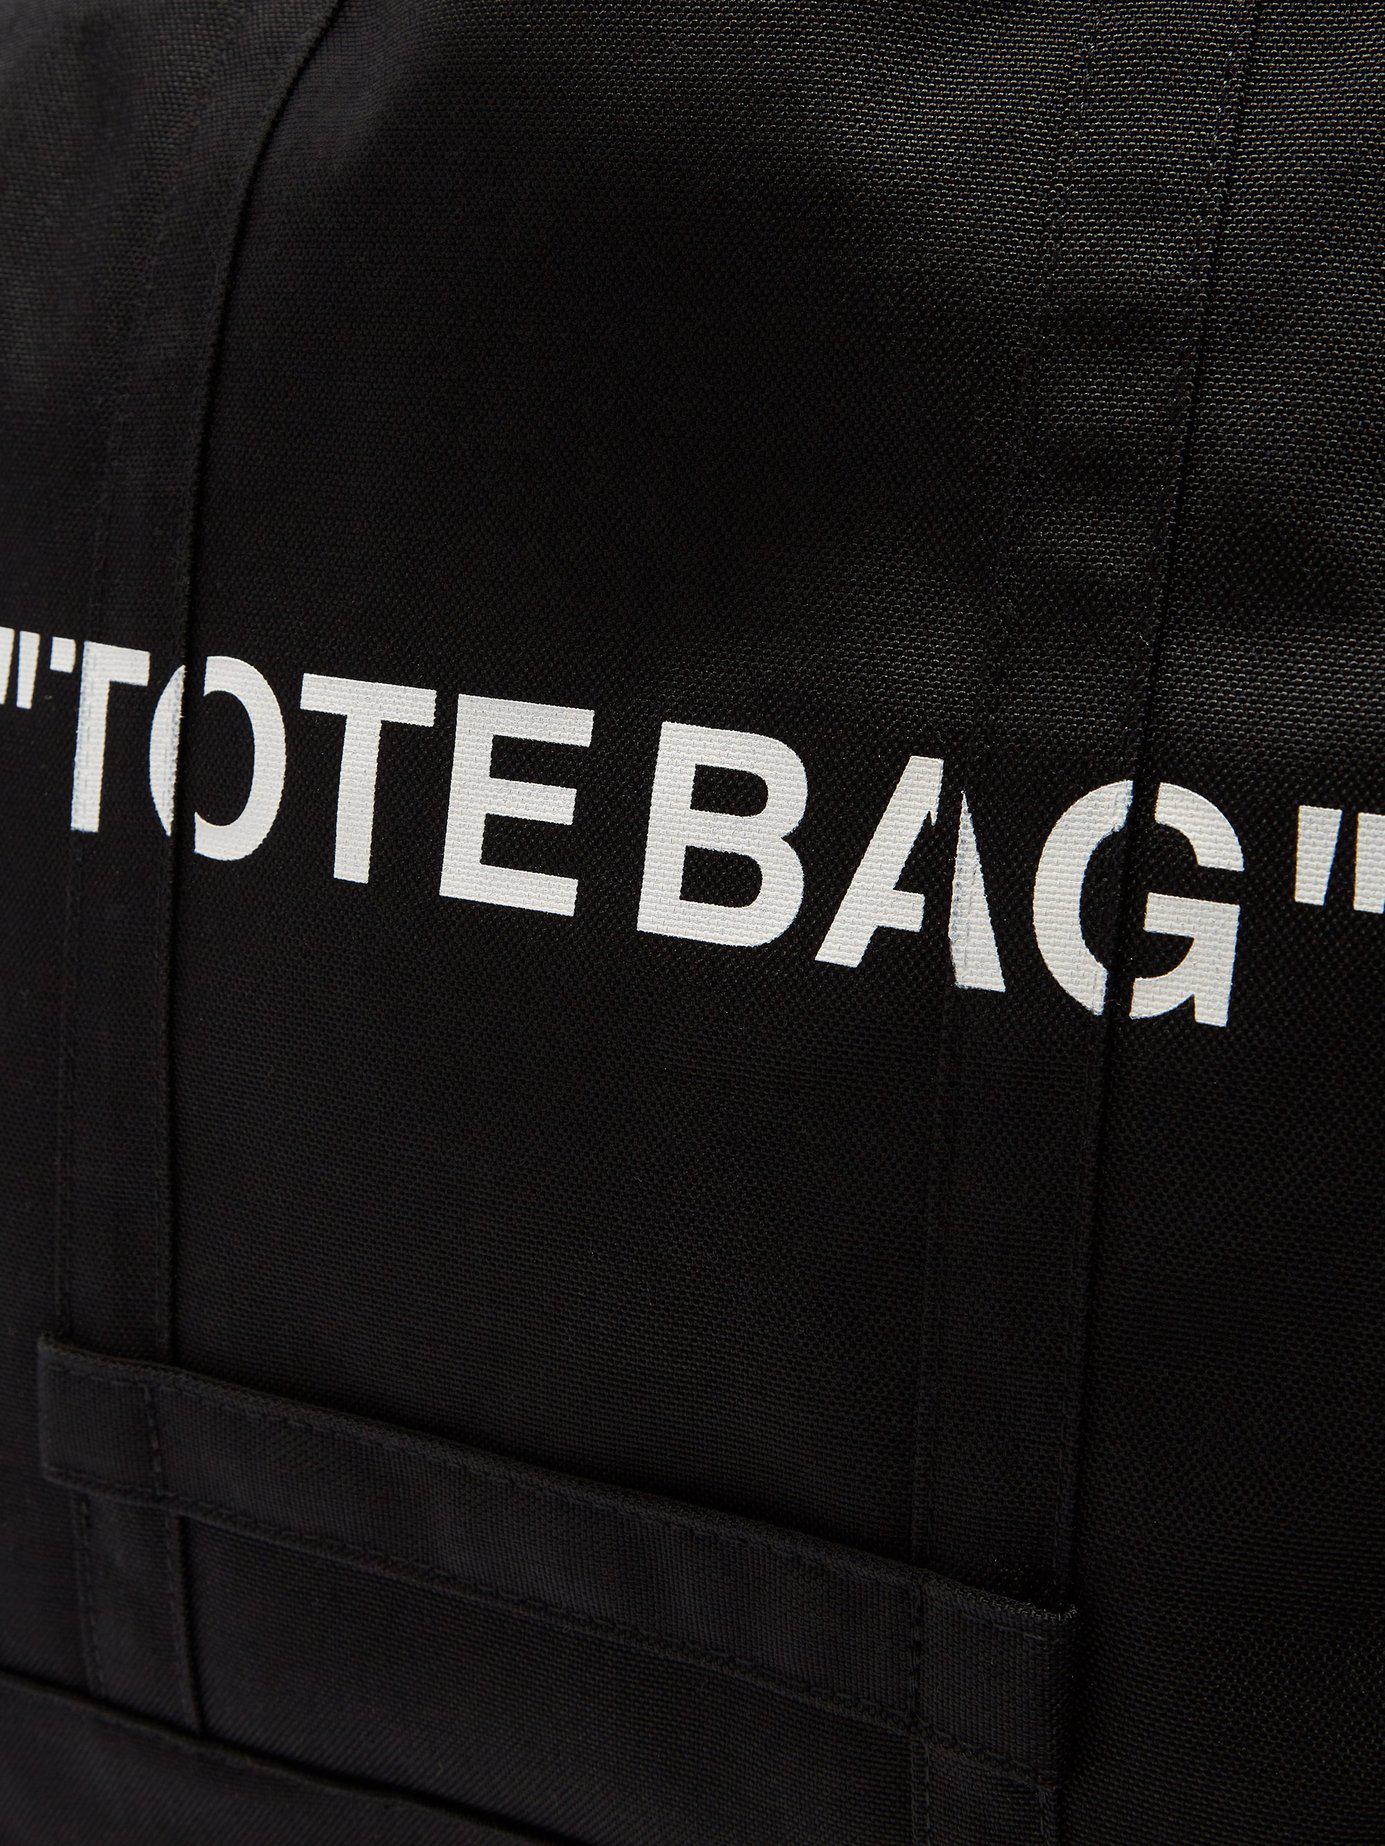 Off-White c/o Virgil Abloh Quote Canvas Tote Bag in Black for Men - Lyst